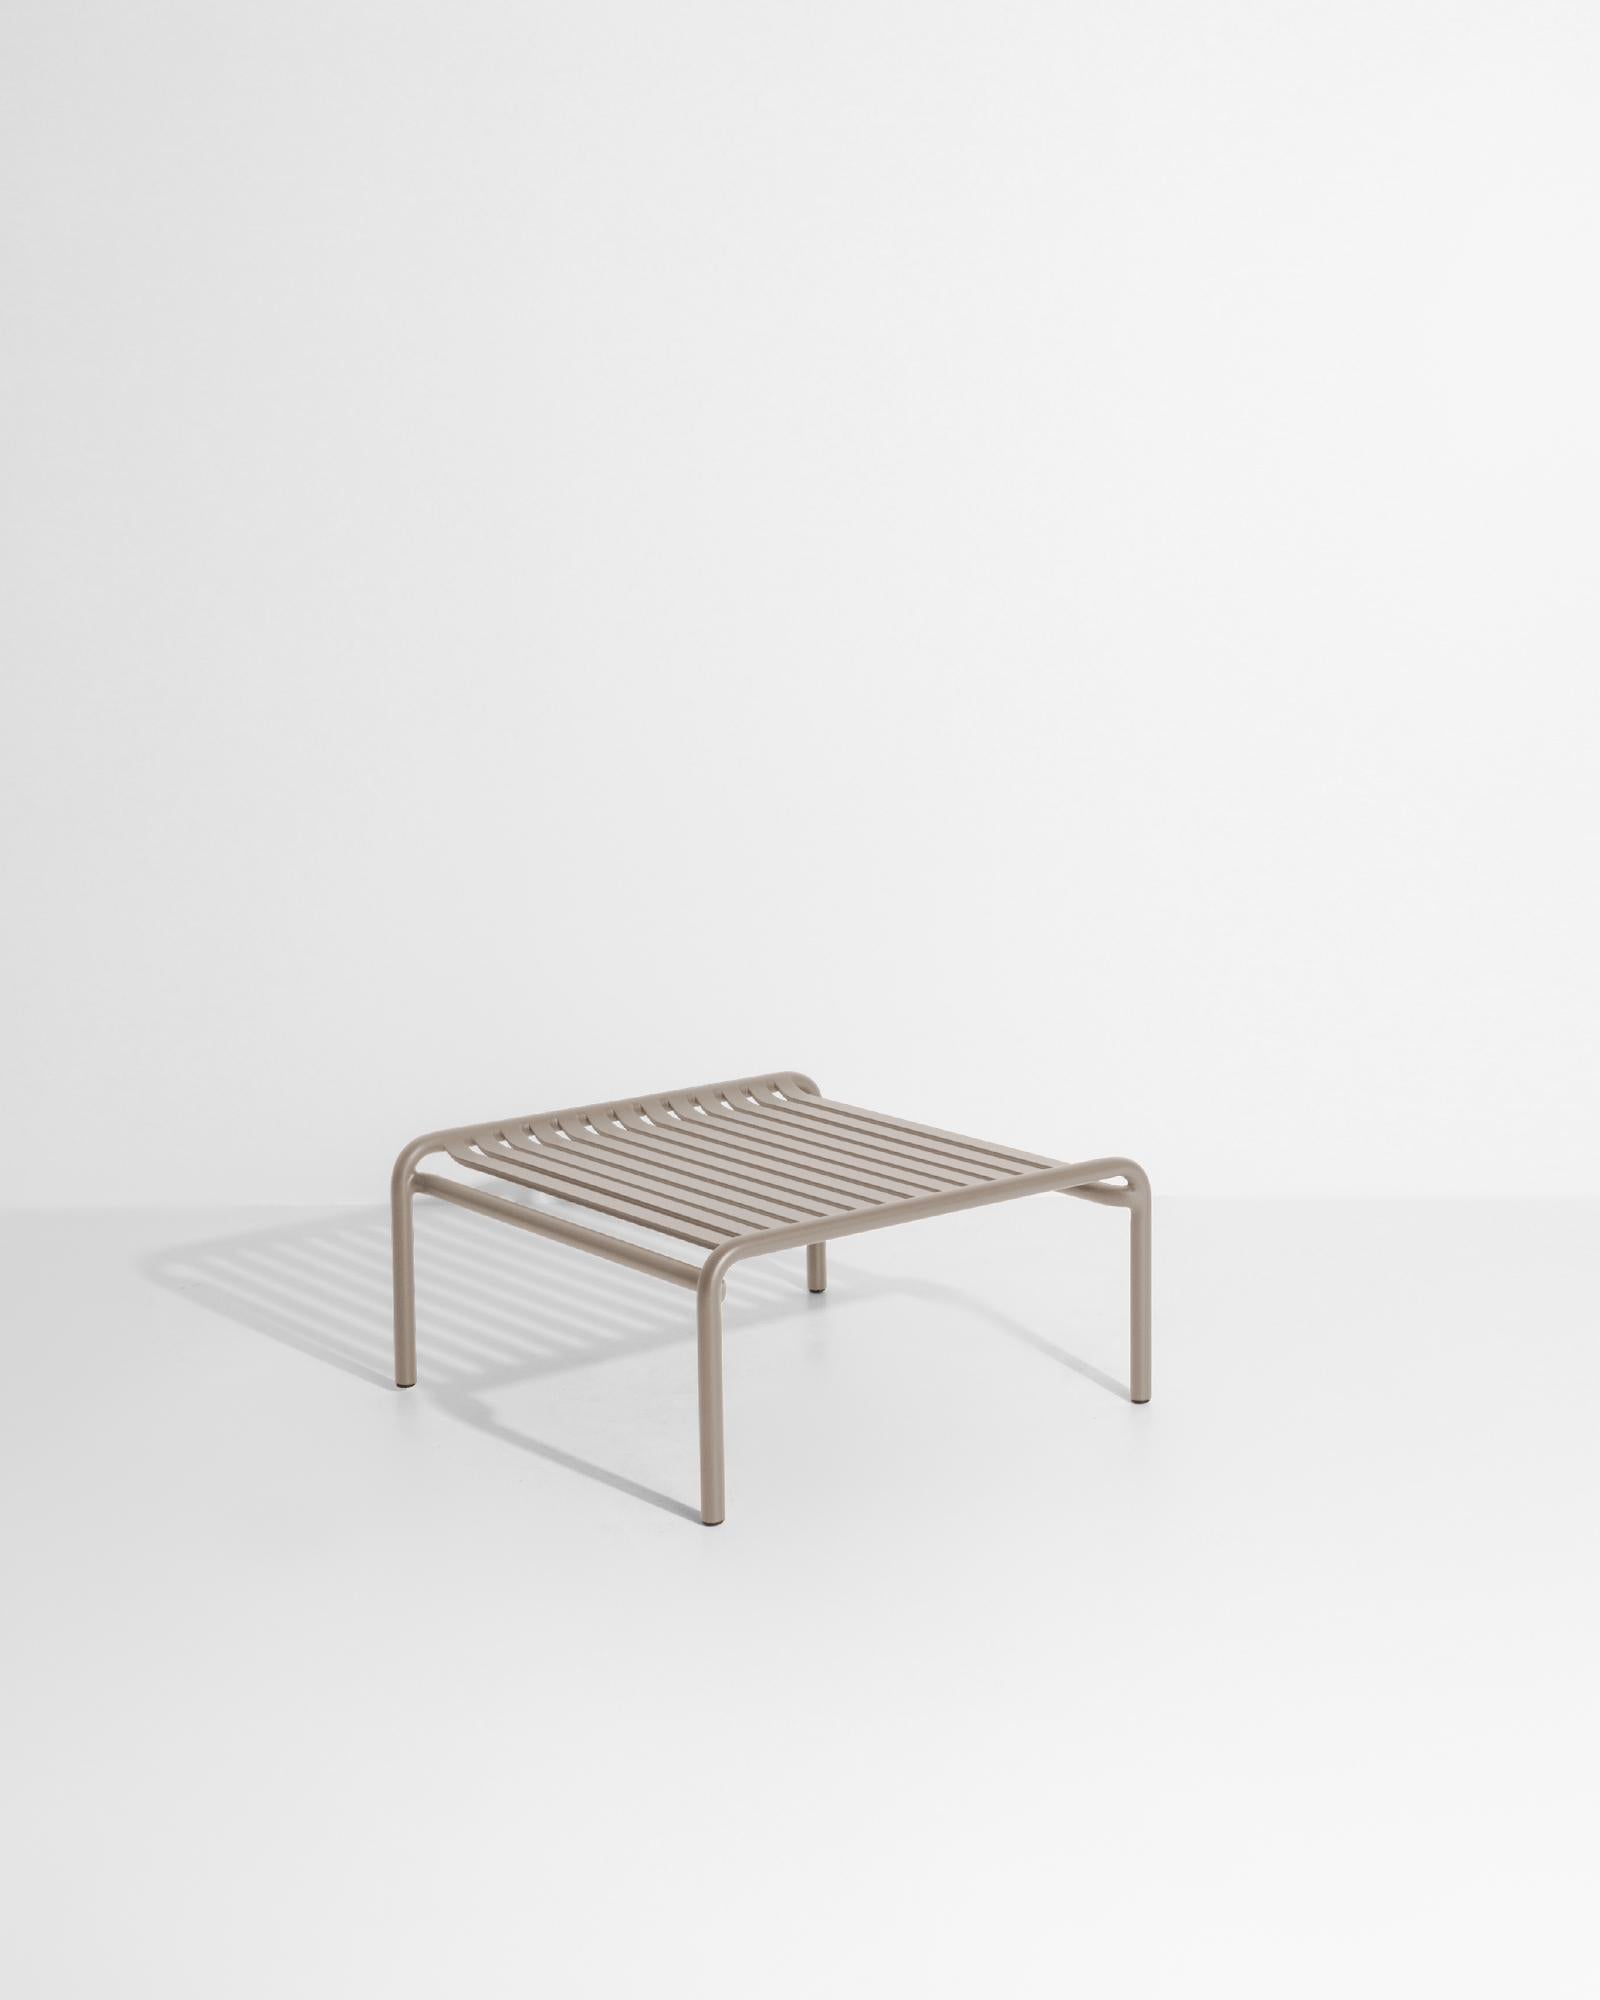 Petite Friture Week-End Coffee Table in Dune Aluminium by Studio BrichetZiegler In New Condition For Sale In Brooklyn, NY